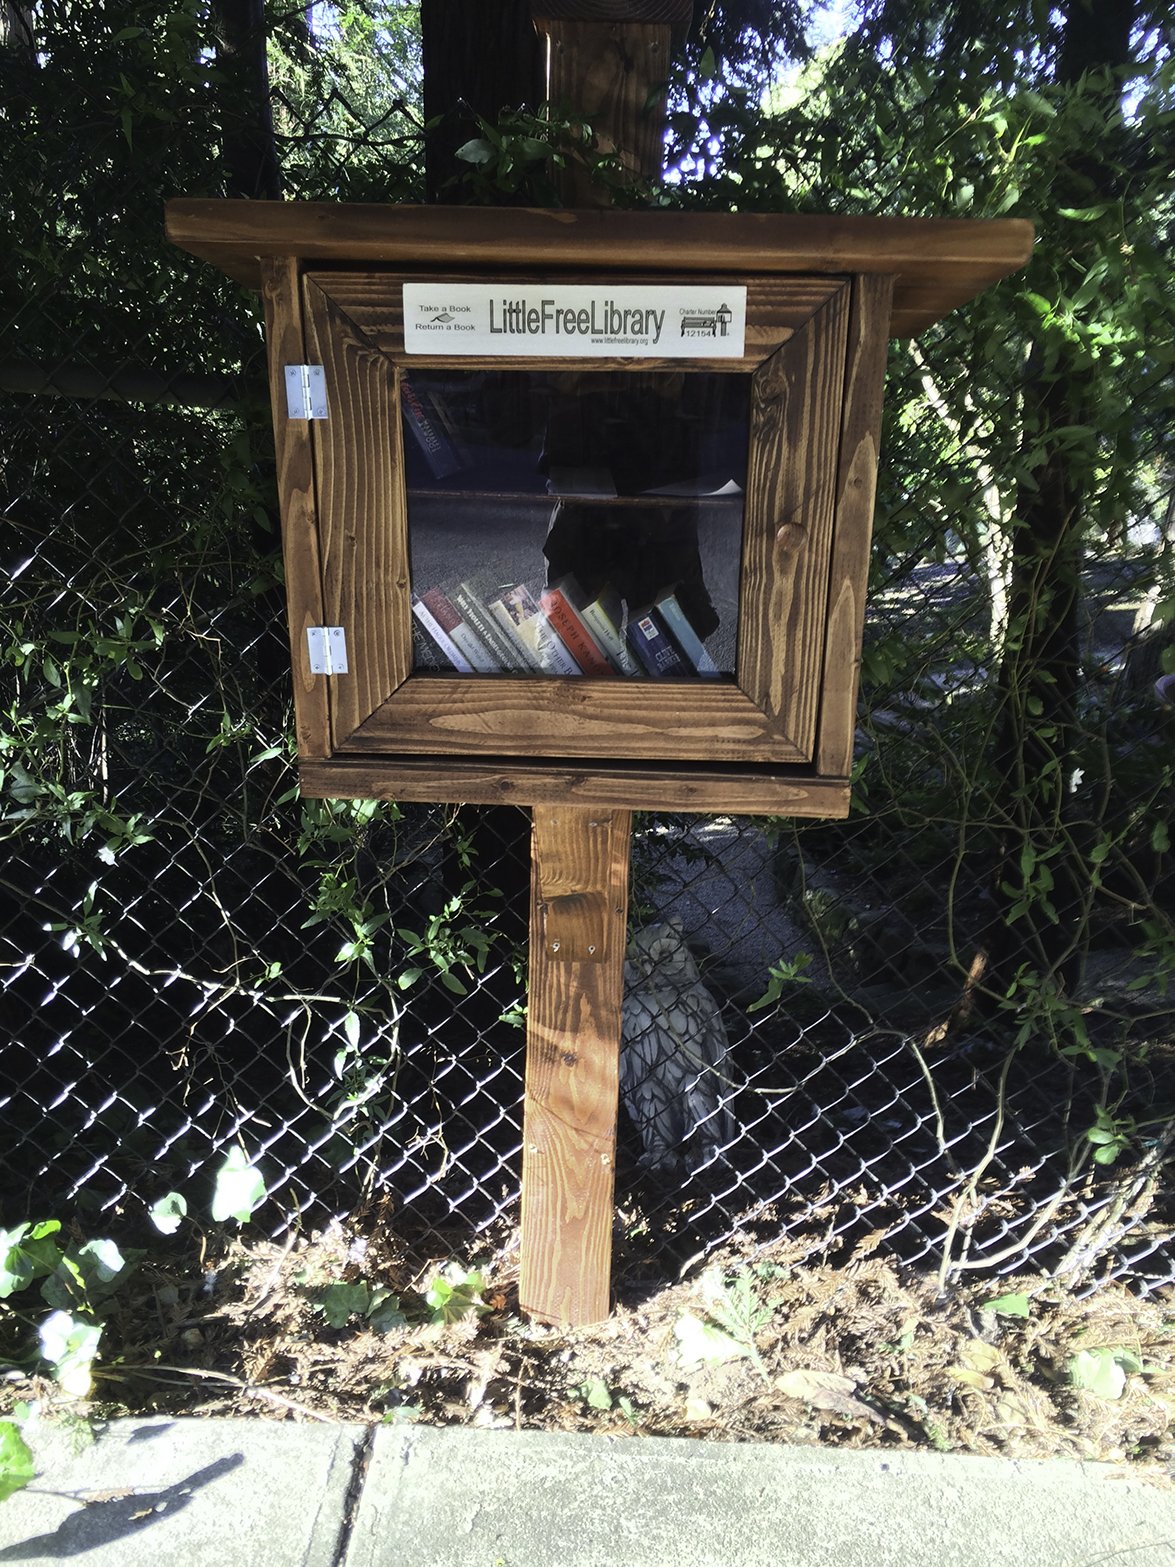 The New Little Free Library